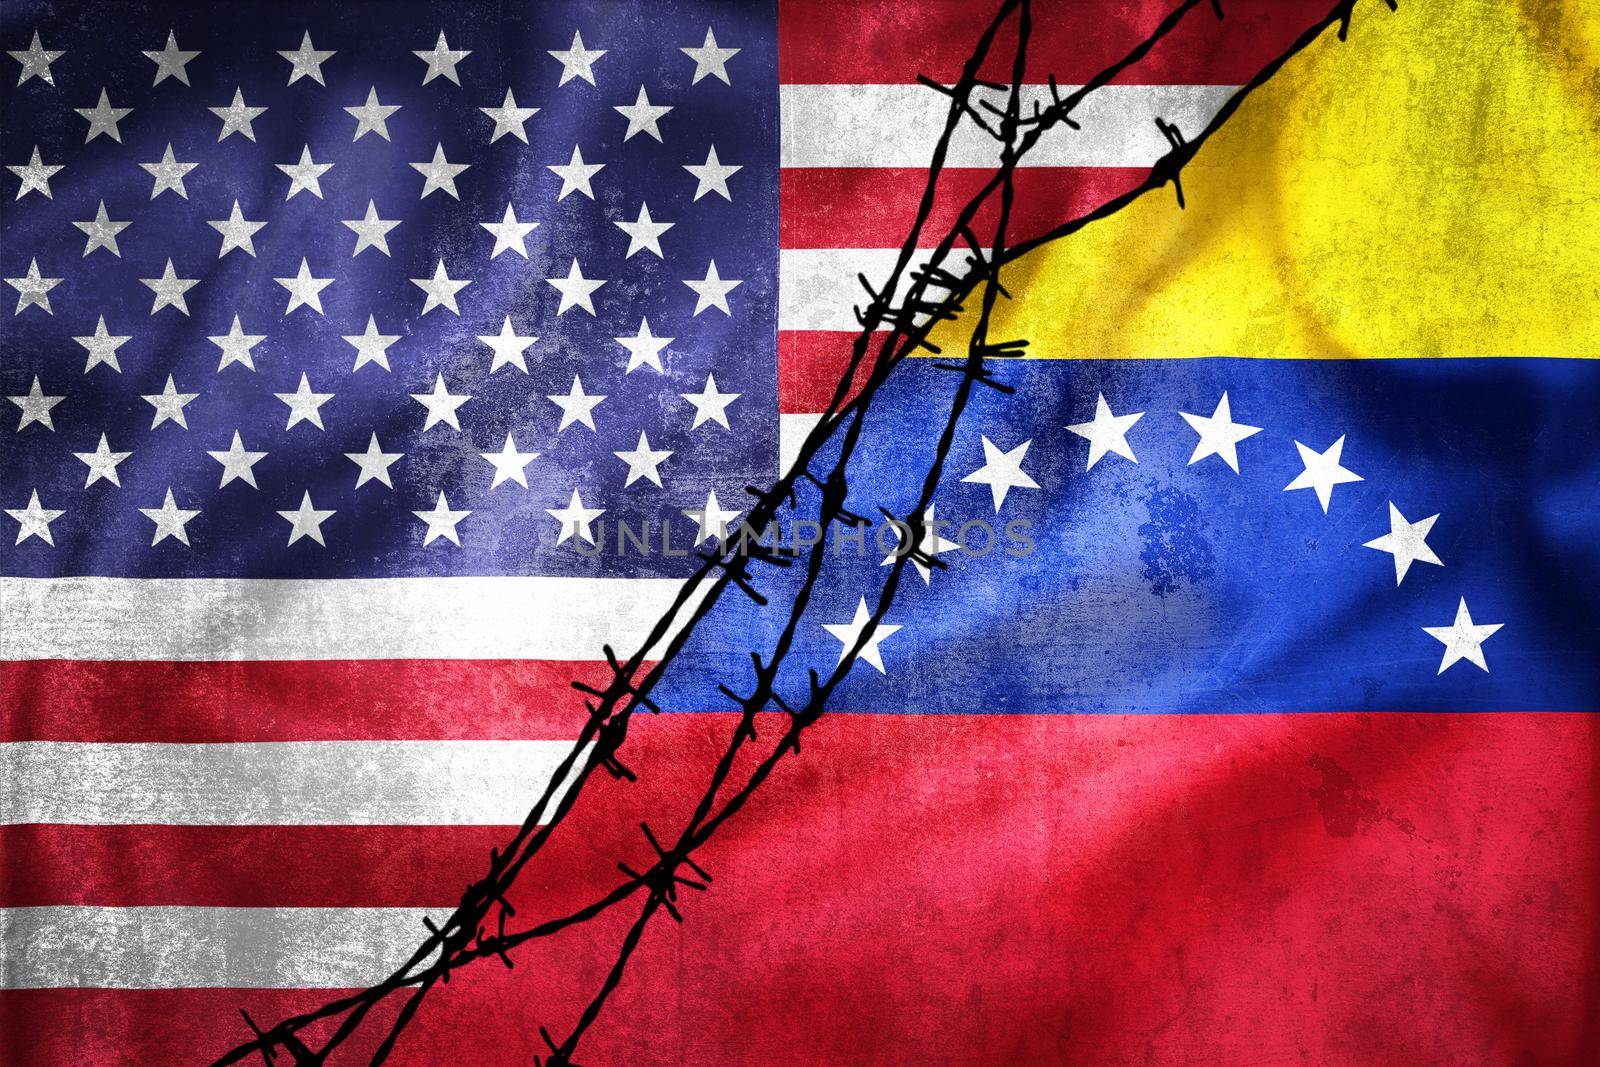 Grunge flags of USA and Venezuela divided by barb wire illustration, concept of tense relations between USA and Venezuela 